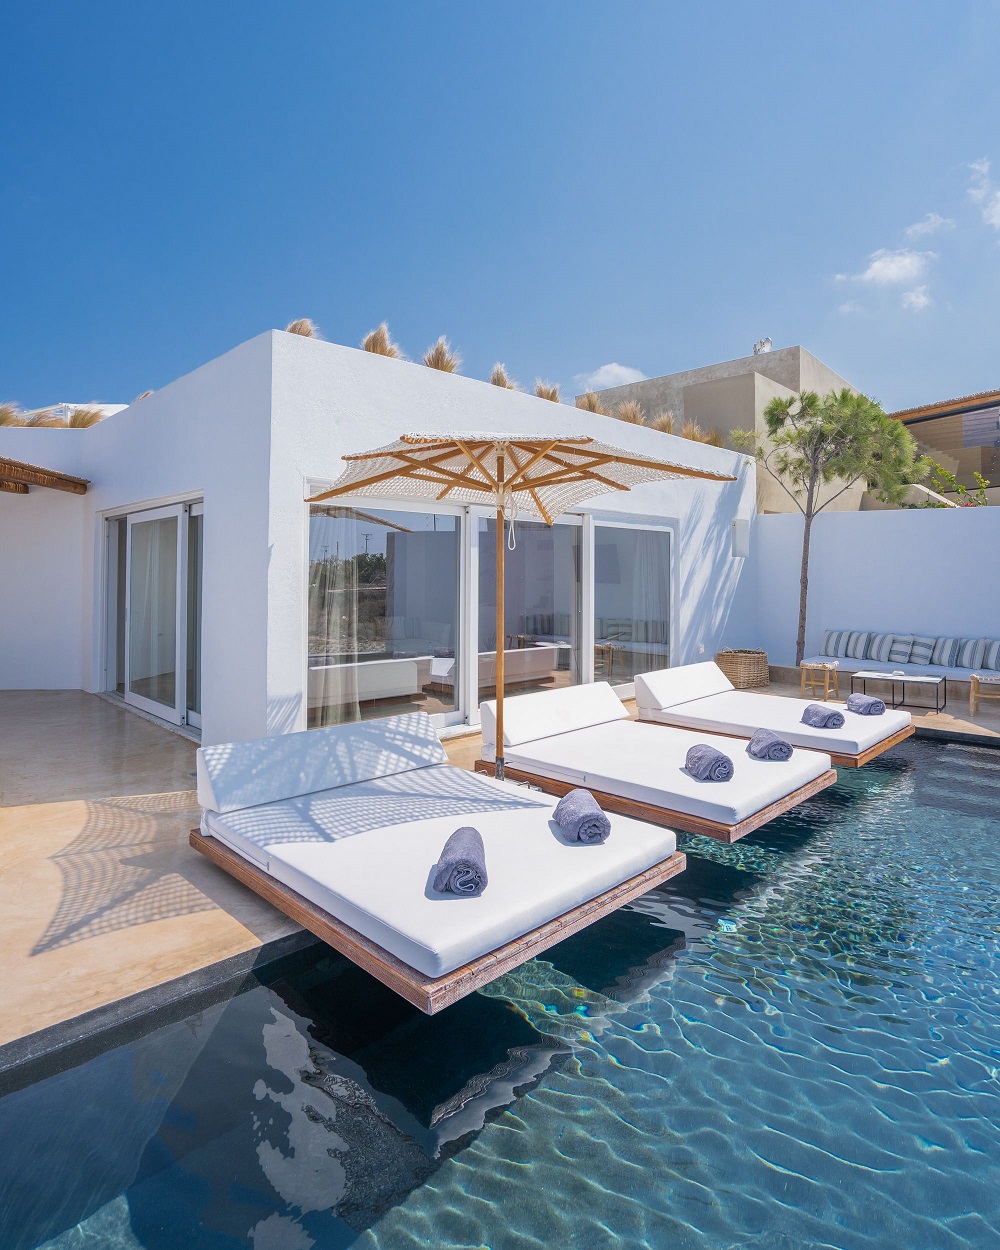 3 Bedroom Villa Loungers and Pool